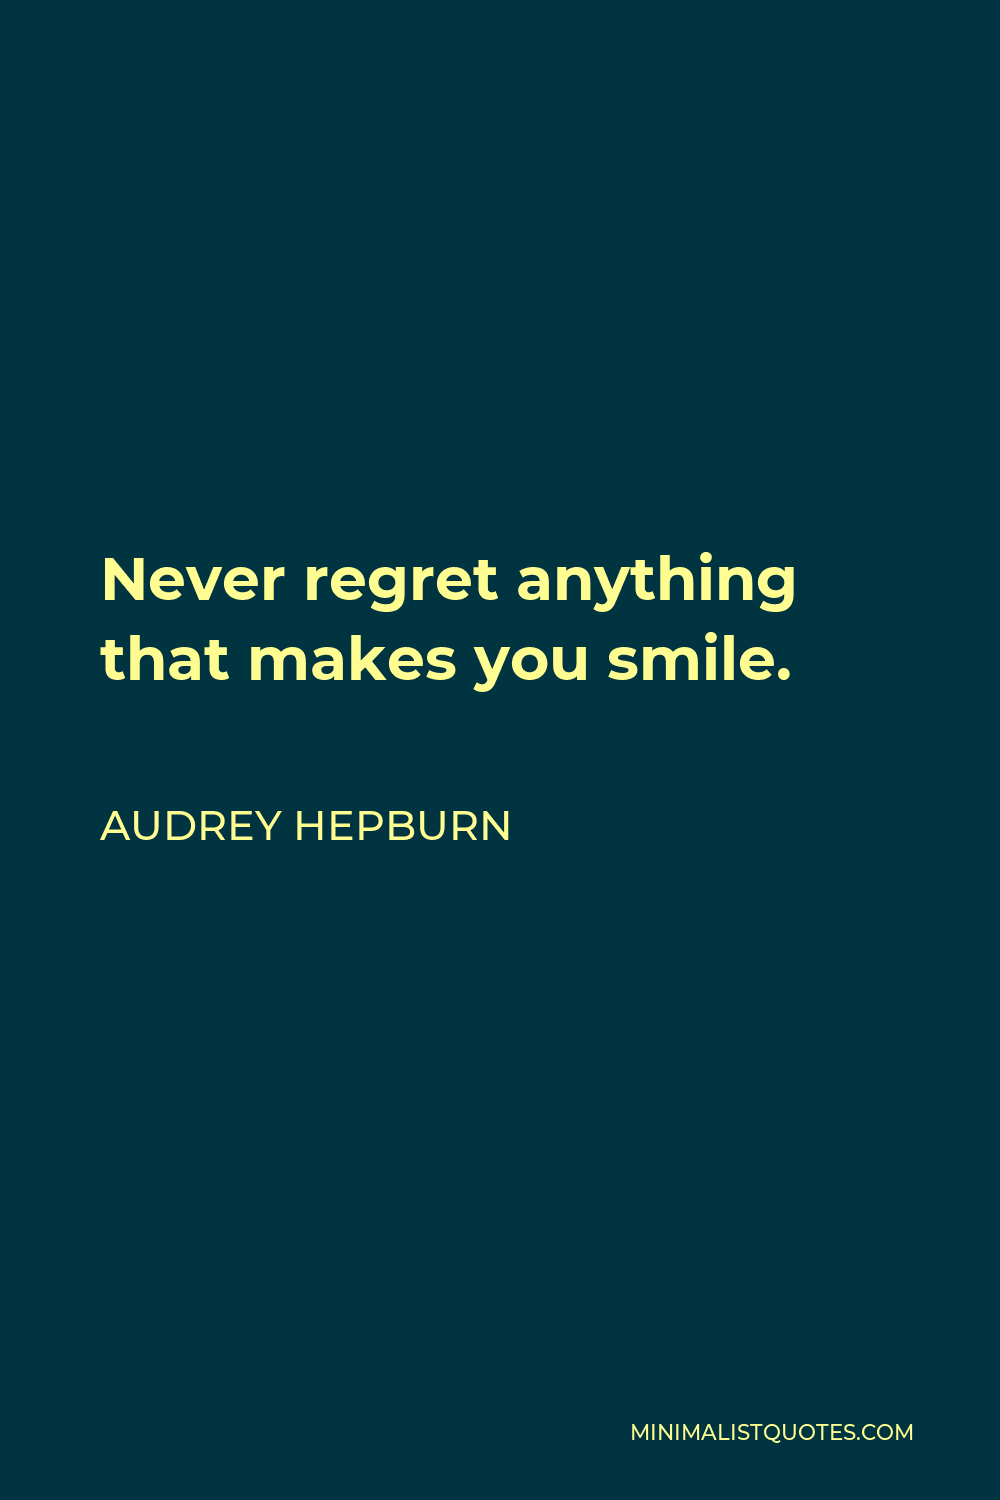 Audrey Hepburn Quote - Never regret anything that makes you smile.